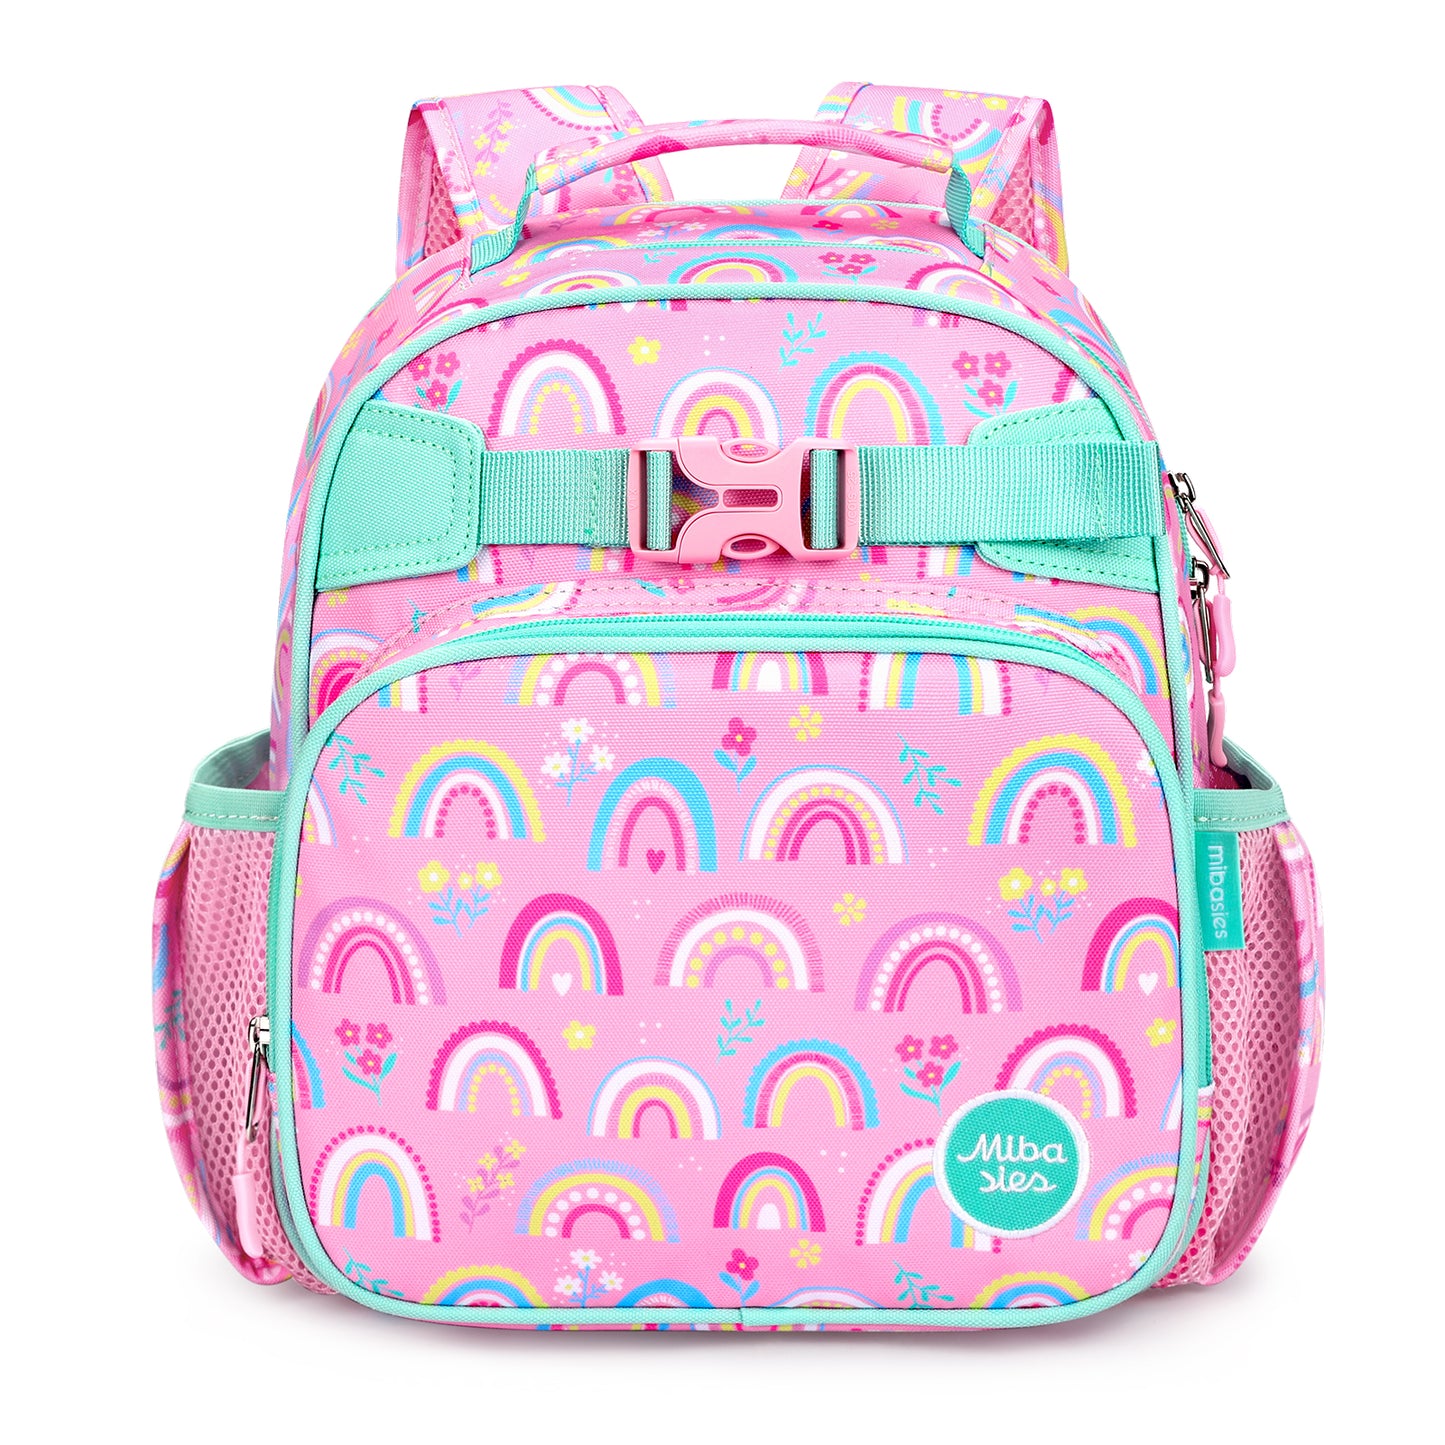 mibasies Toddler Backpack for ages 2-4: Preschool kindergarten Backpack with Chest Strap